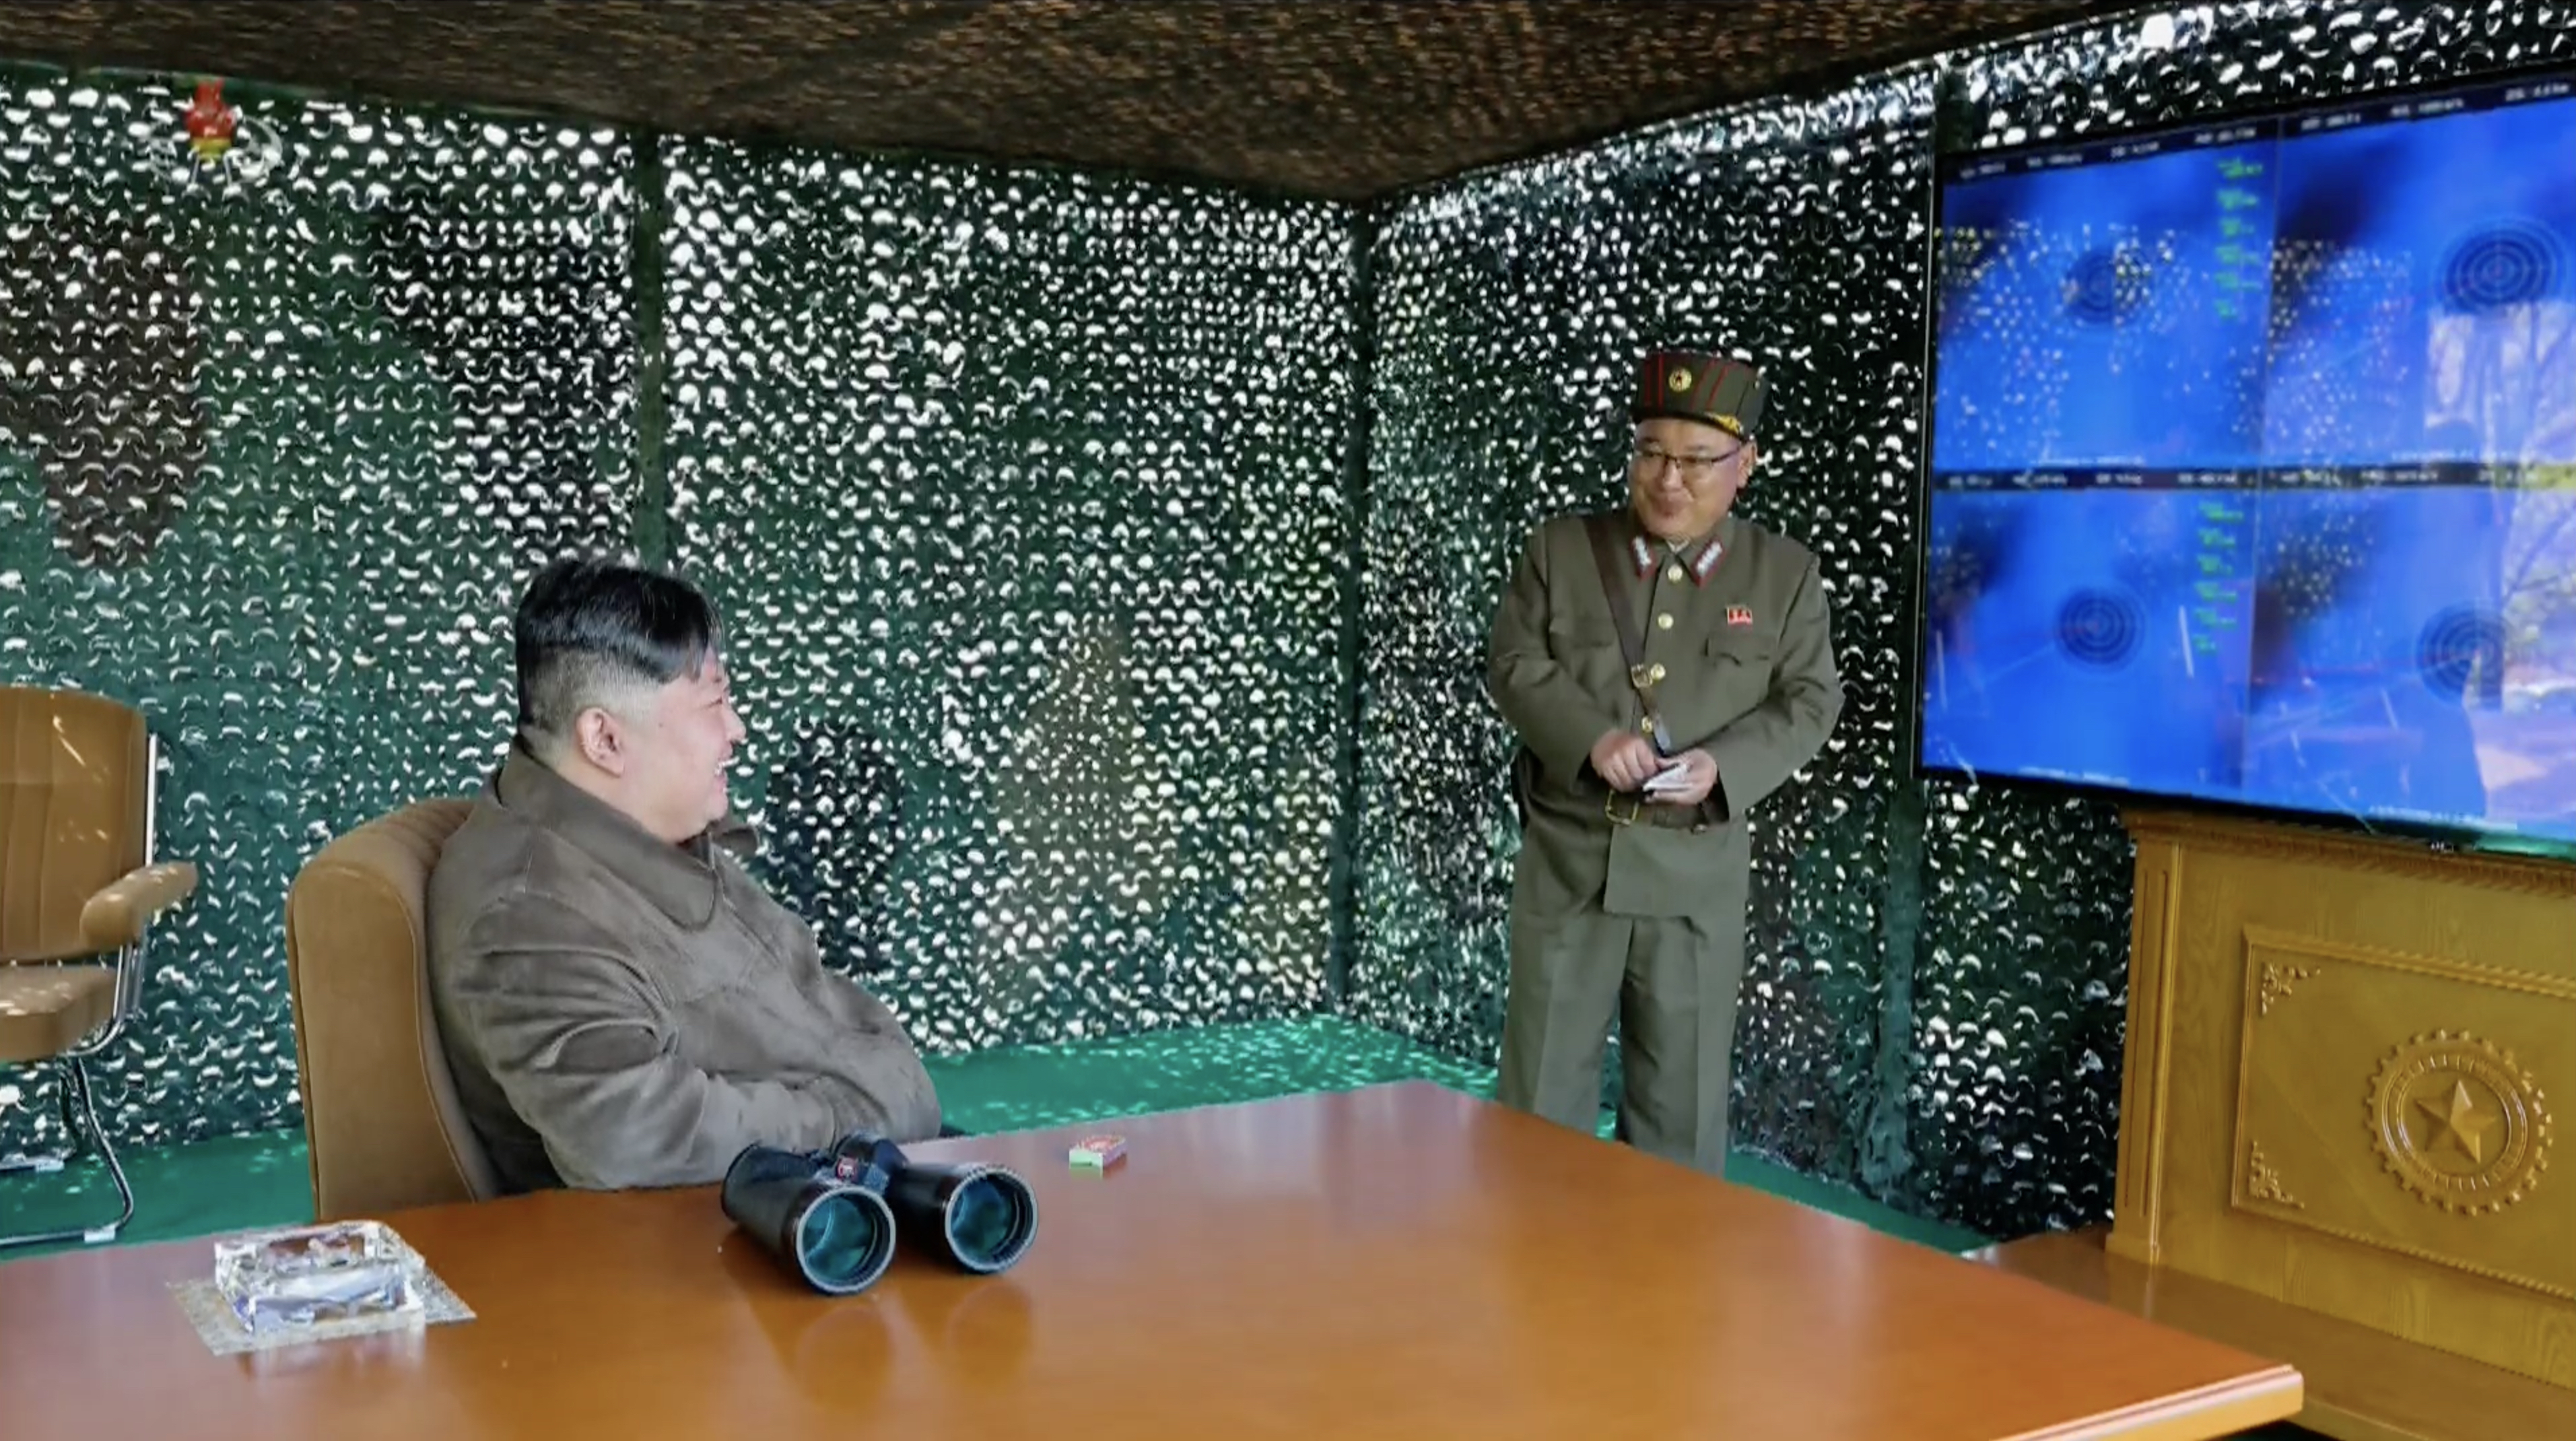 kctv-apr23-2024-kju-salvo-missile-launch-test-600mm-mlrs-kn25-jindallae-guesthouse-command-and-control-systems-27-observation-stand-kim-jong-sik-trajectory-screens-target-island-east-coast.jpg